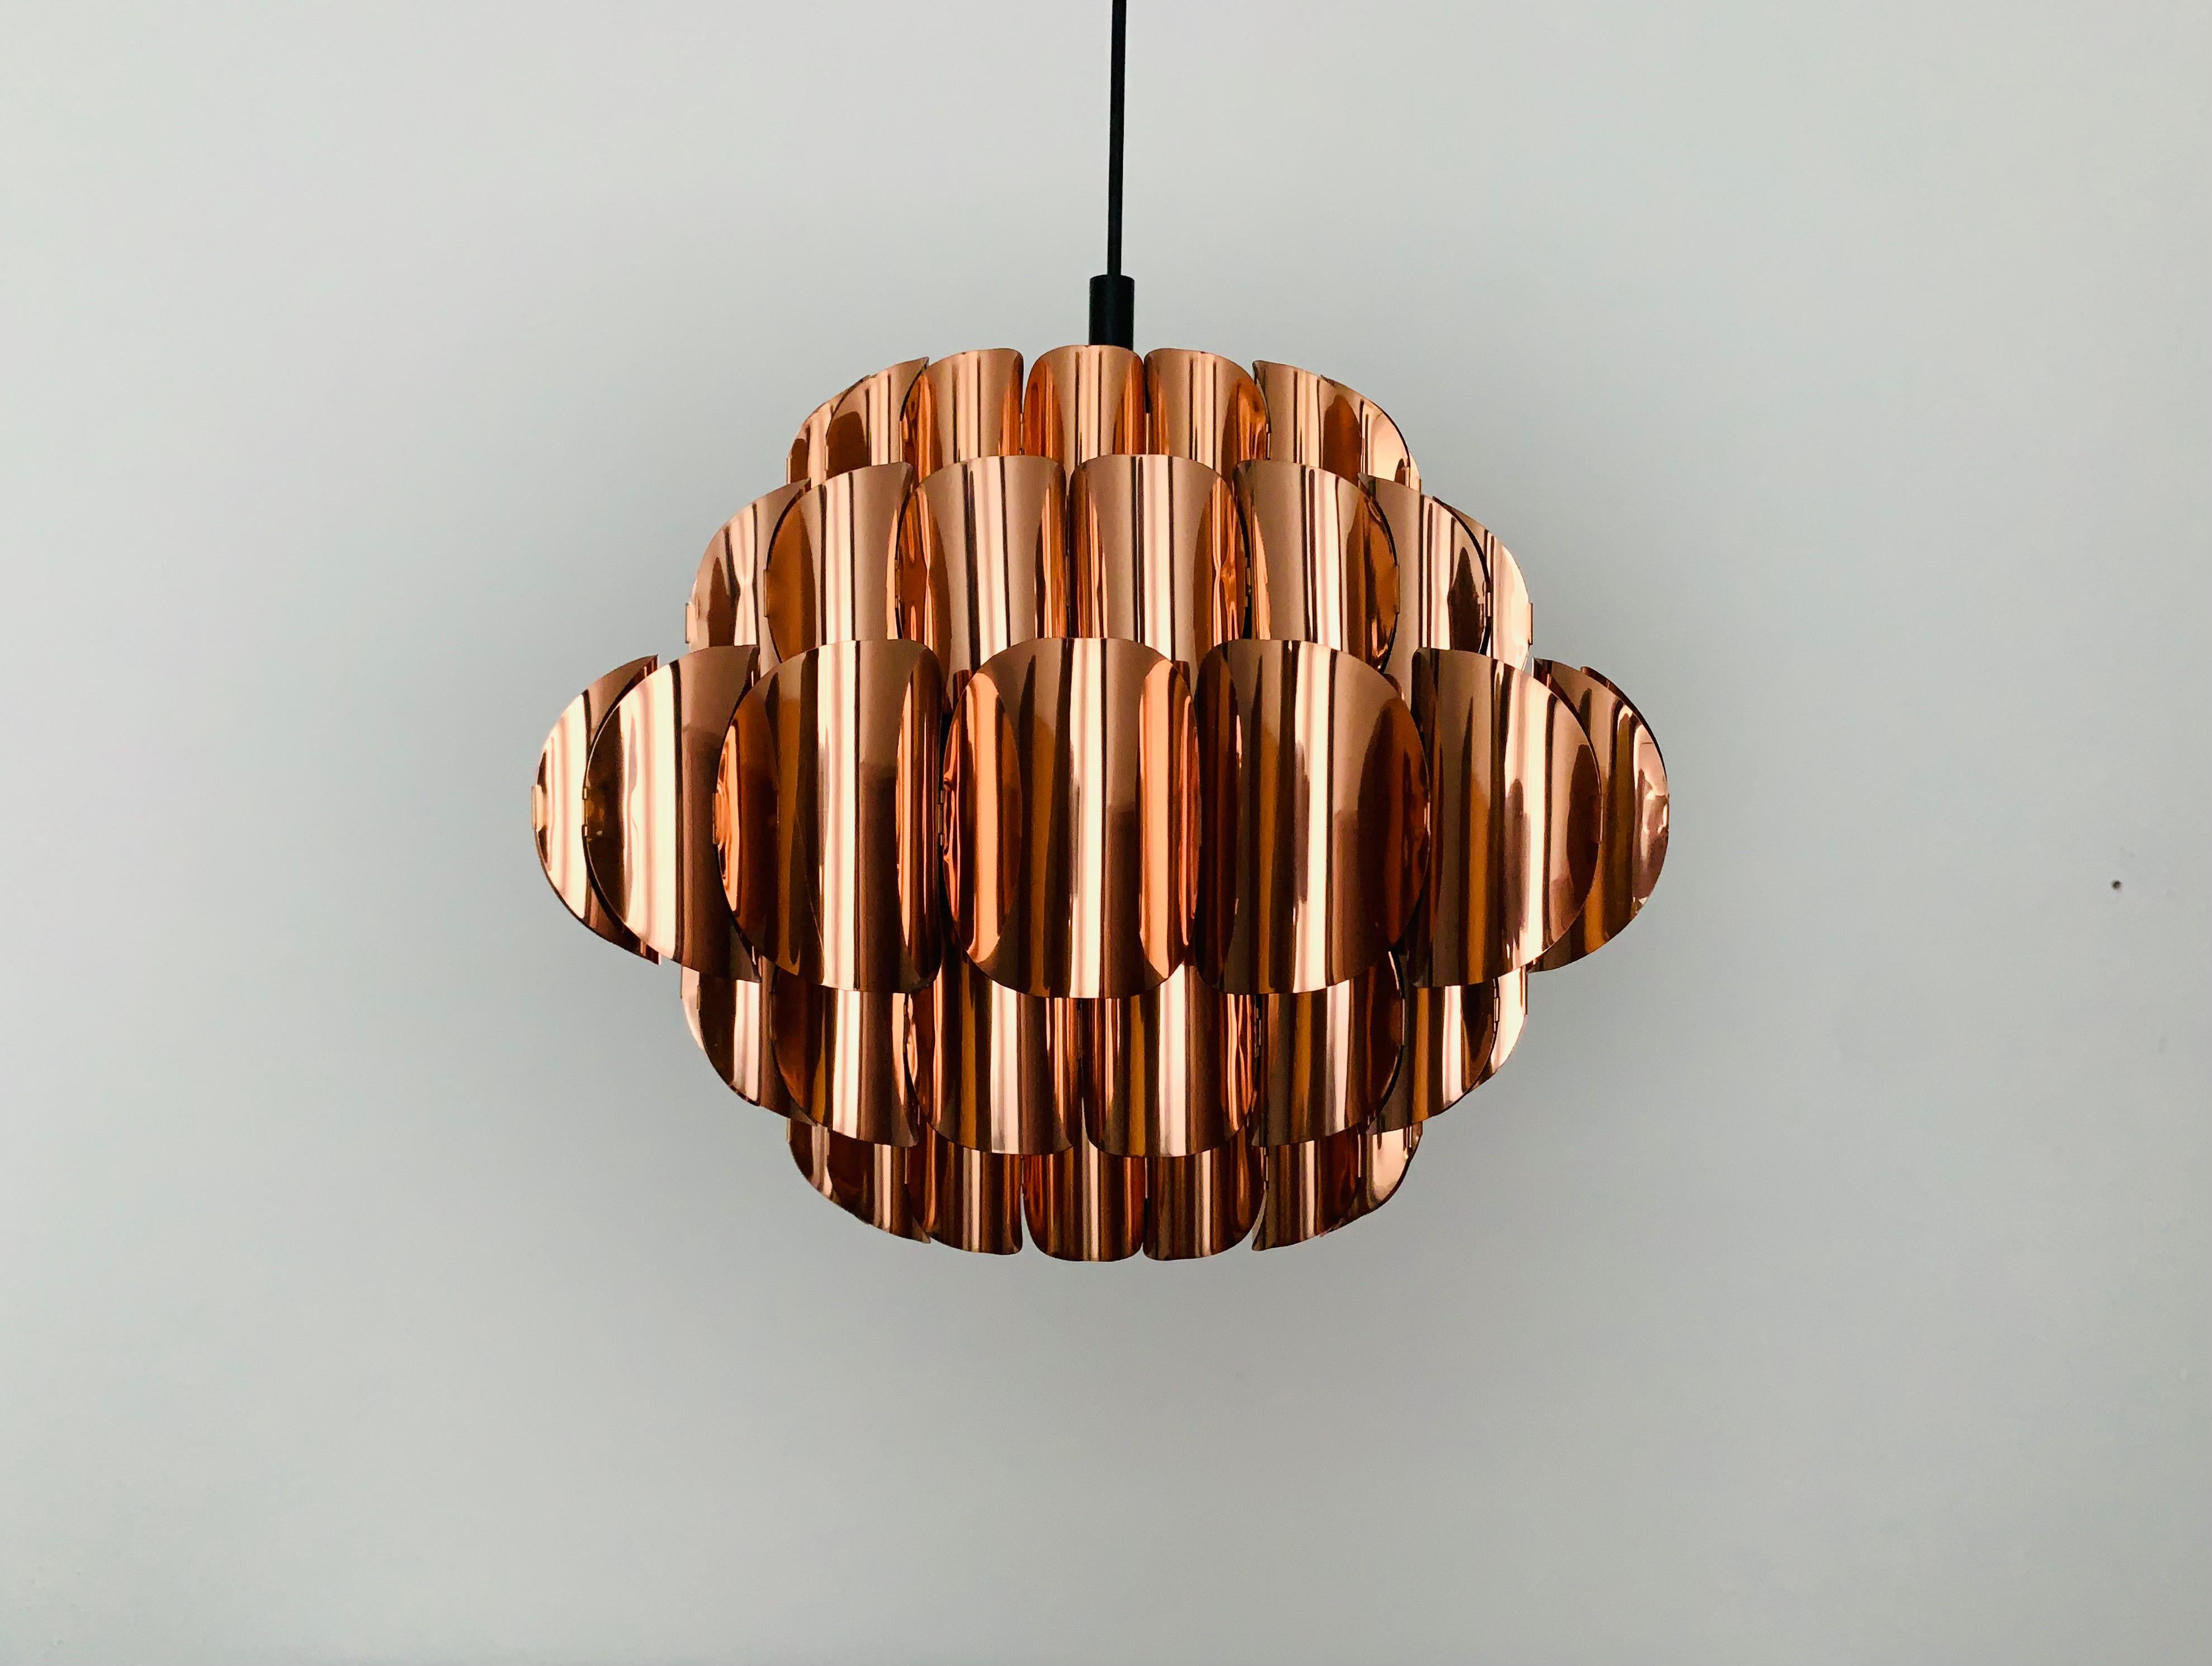 Wonderful copper pendant light by Thorsten Orrling from the 1960s.
Due to the extraordinary design and the great workmanship, the copper sparkles particularly beautifully.
The slats in 5 rows create a spectacular play of light in the